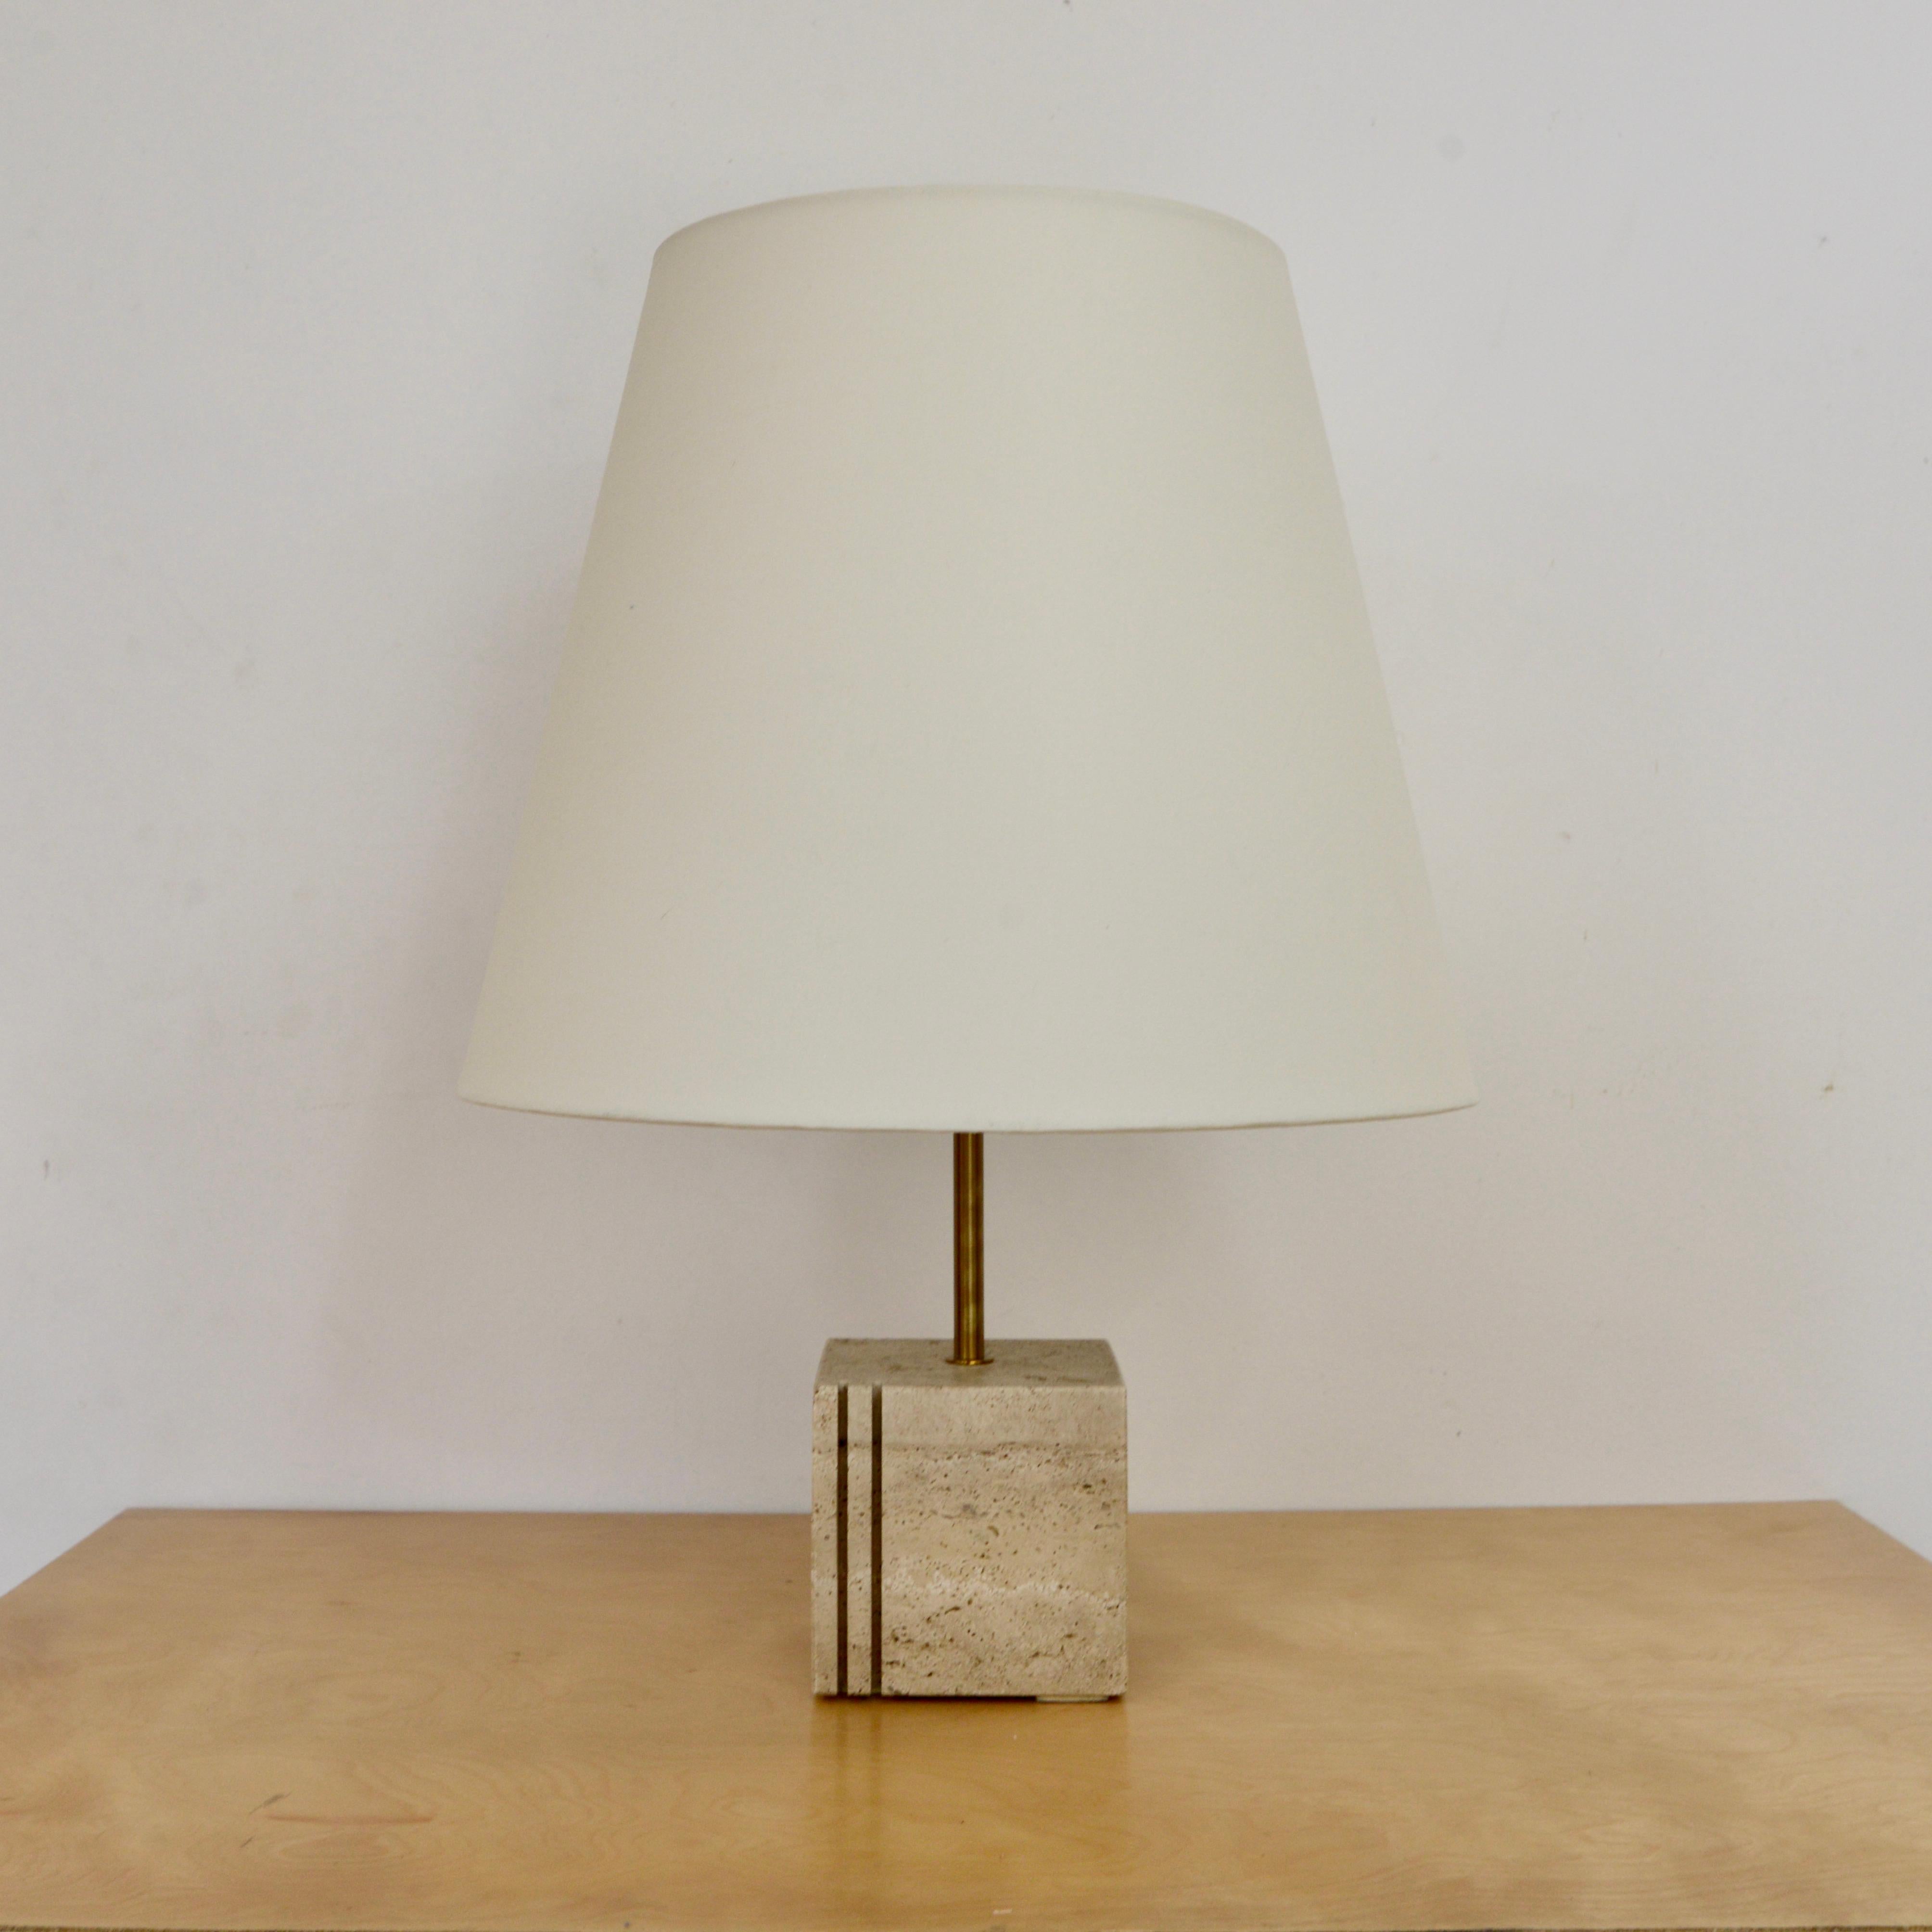 Vintage carved Italian cubic travertine table lamp from the 1950s. Restored and fully rewired with a single E26 medium based socket, ready to be used in the USA. 
Measurements:
Height: 22.5”
Shade diameter: 16”
Base diametre: 5” cubed.